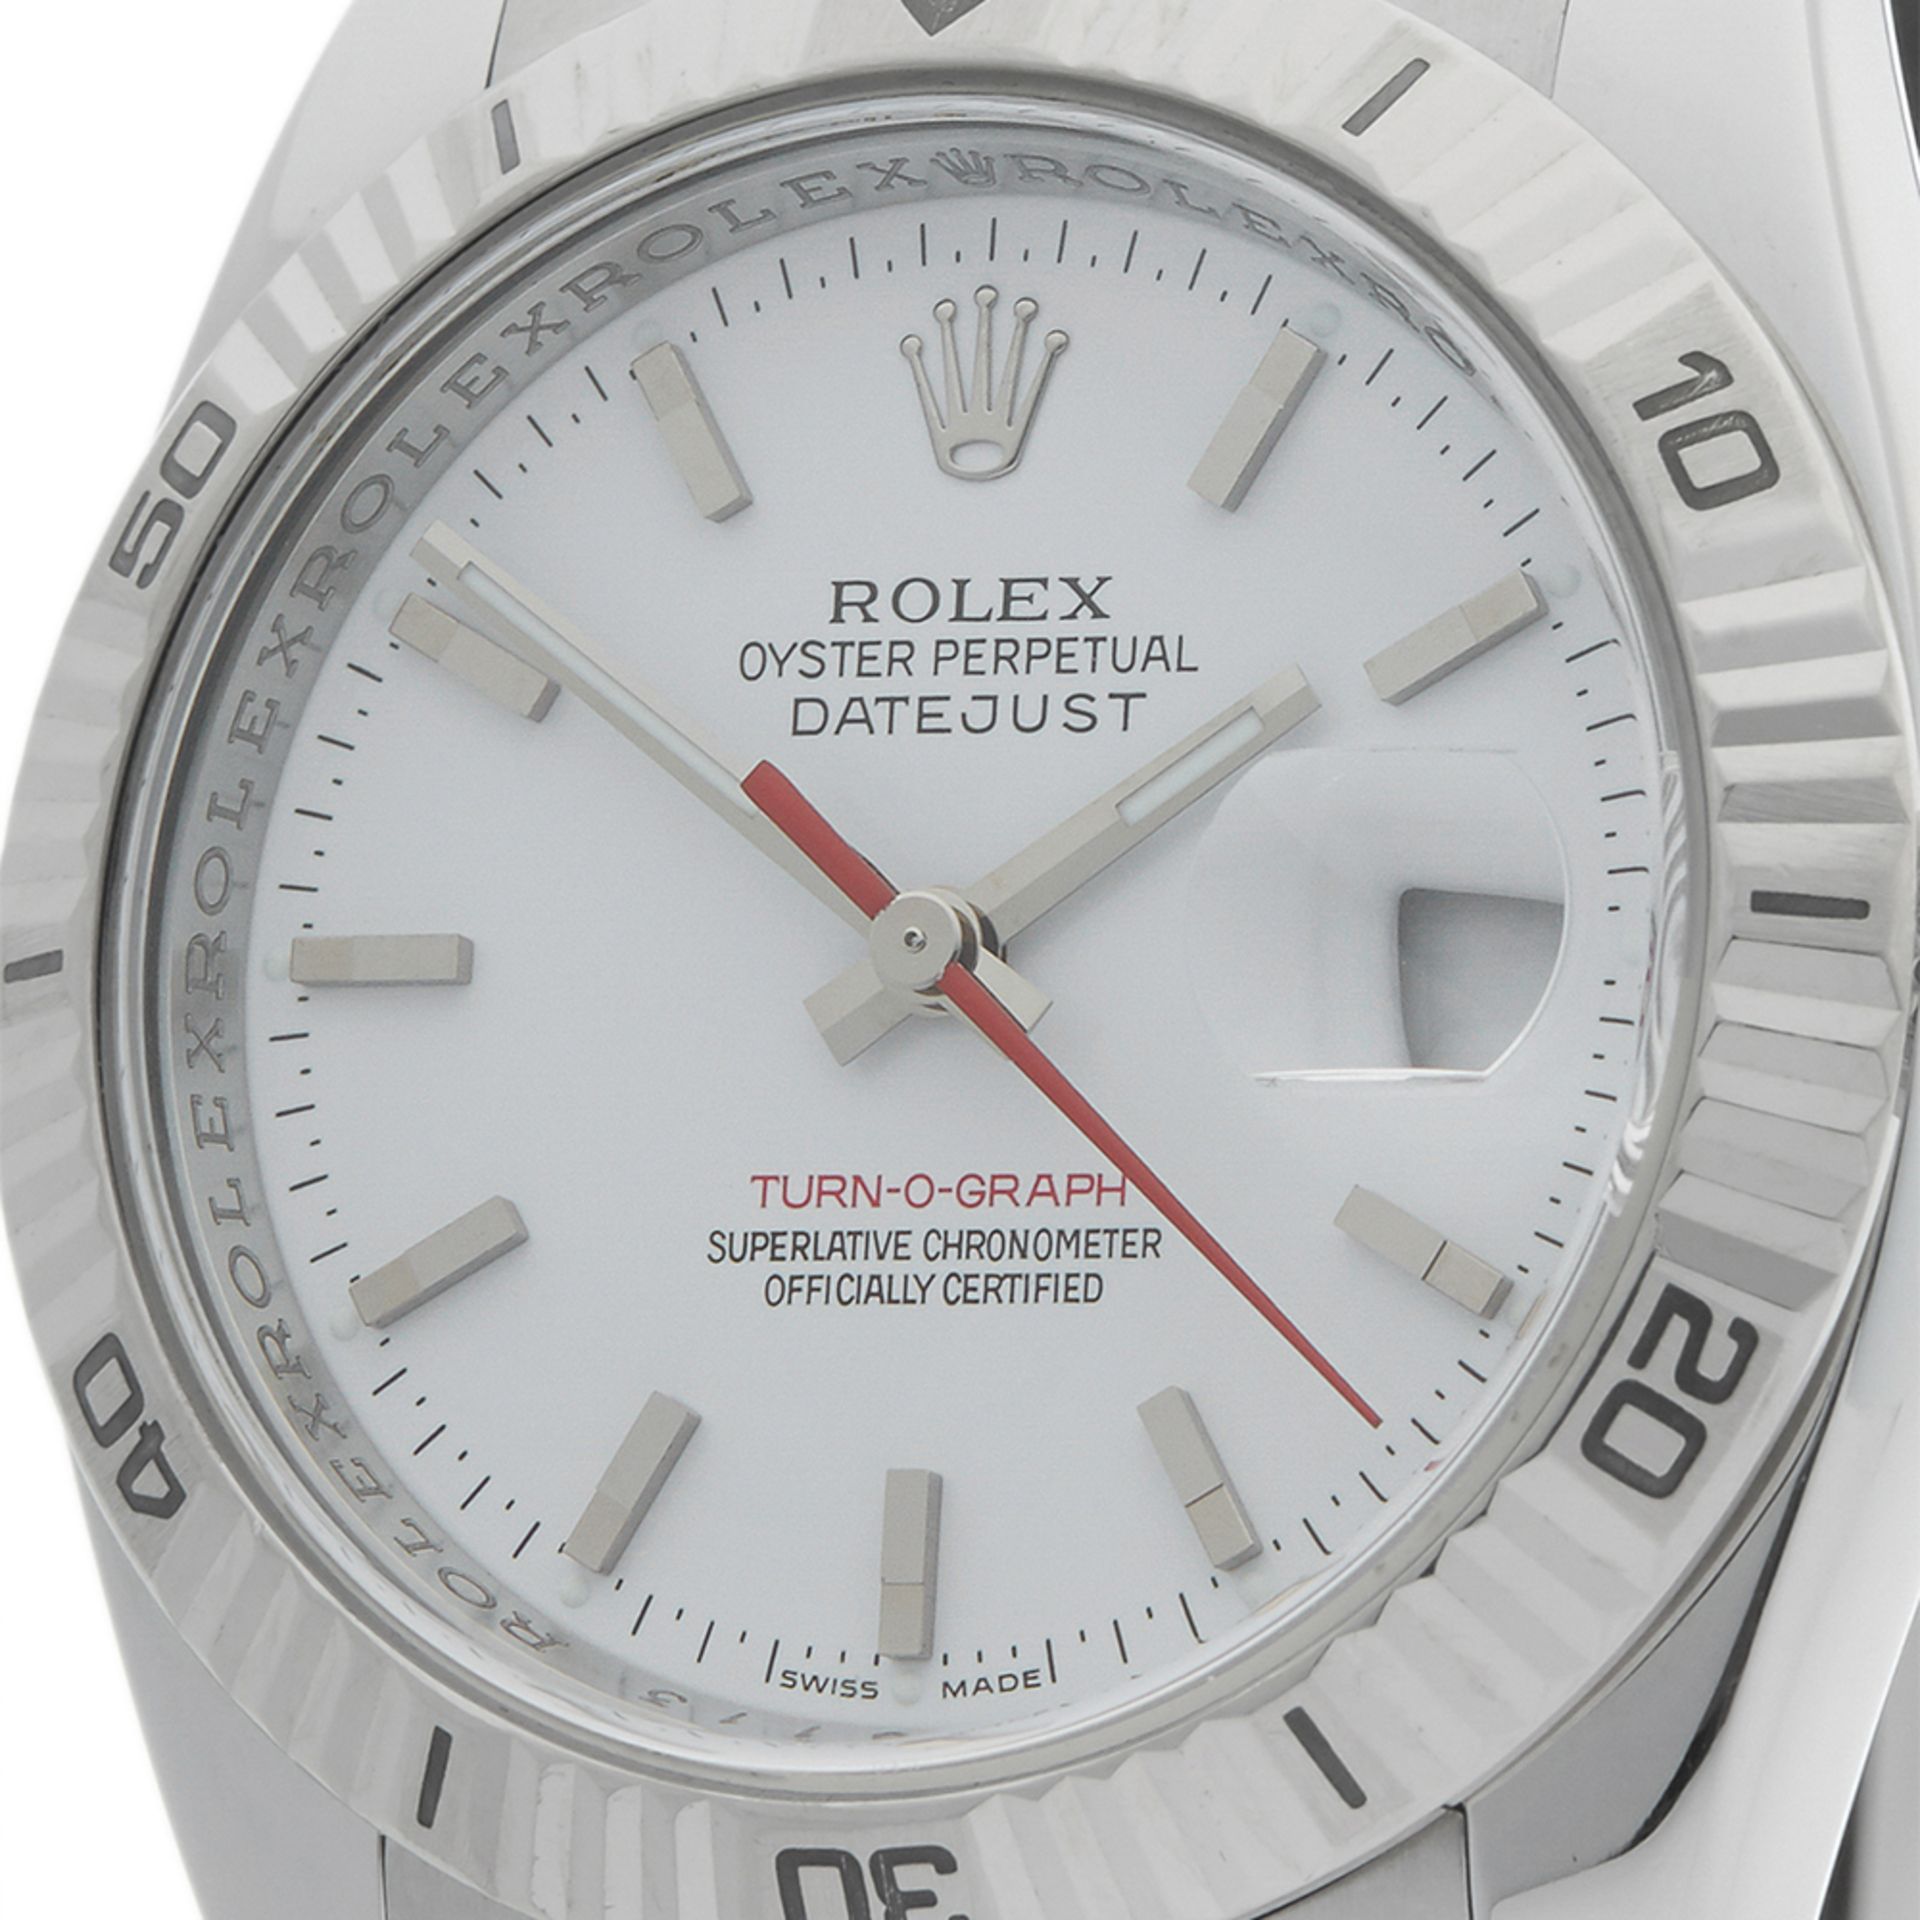 Datejust Turn-O-Graph 36mm Stainless Steel - 116264 - Image 3 of 9